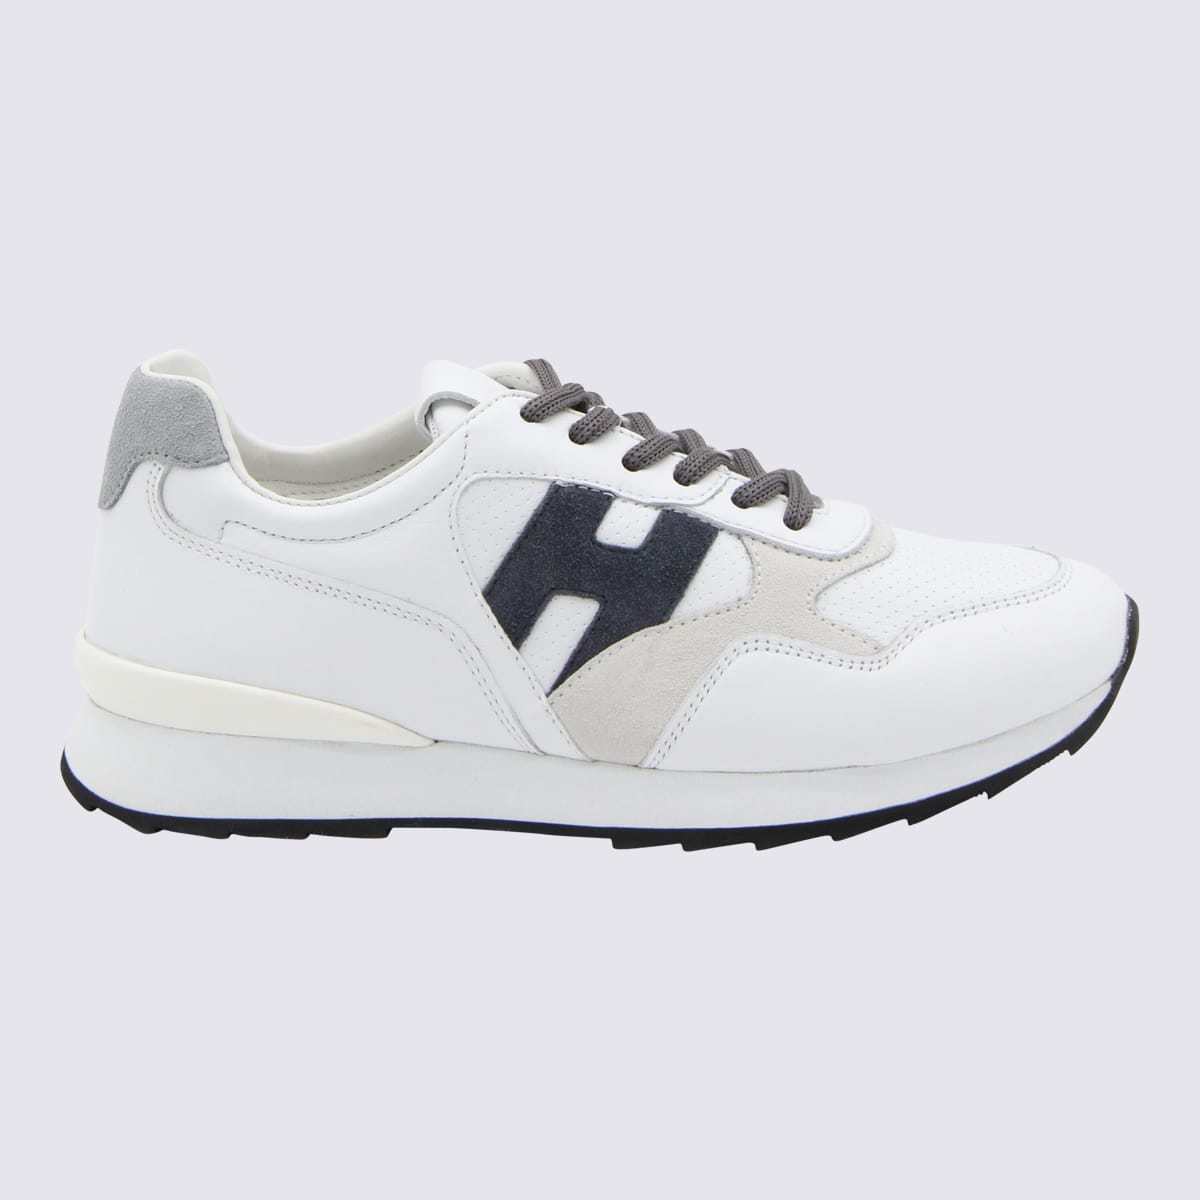 Hogan Kids' White Leather R261 Sneakers